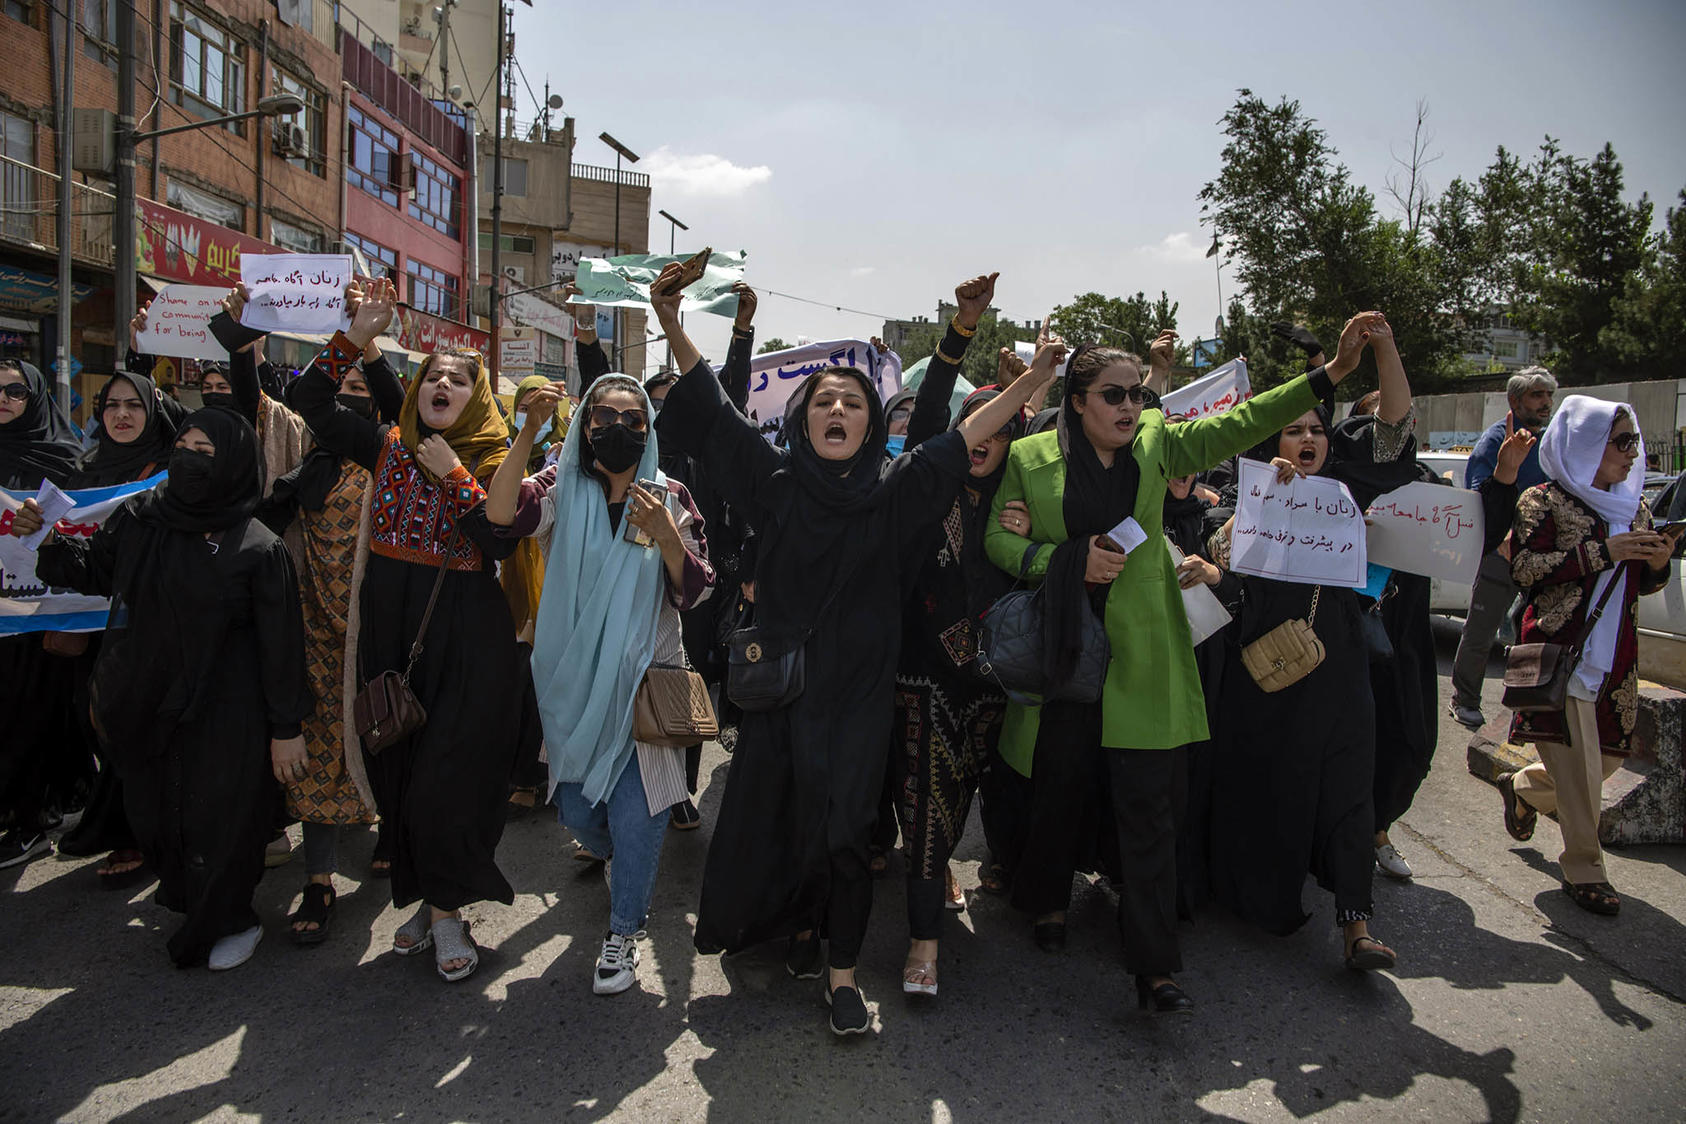 Afghan women protest Taliban rule in Kabul in August before gunmen dispersed them with gunfire into the air. Women have continued to resist a gradually tightening Taliban crackdown against them. (Kiana Hayeri/The New York Times)